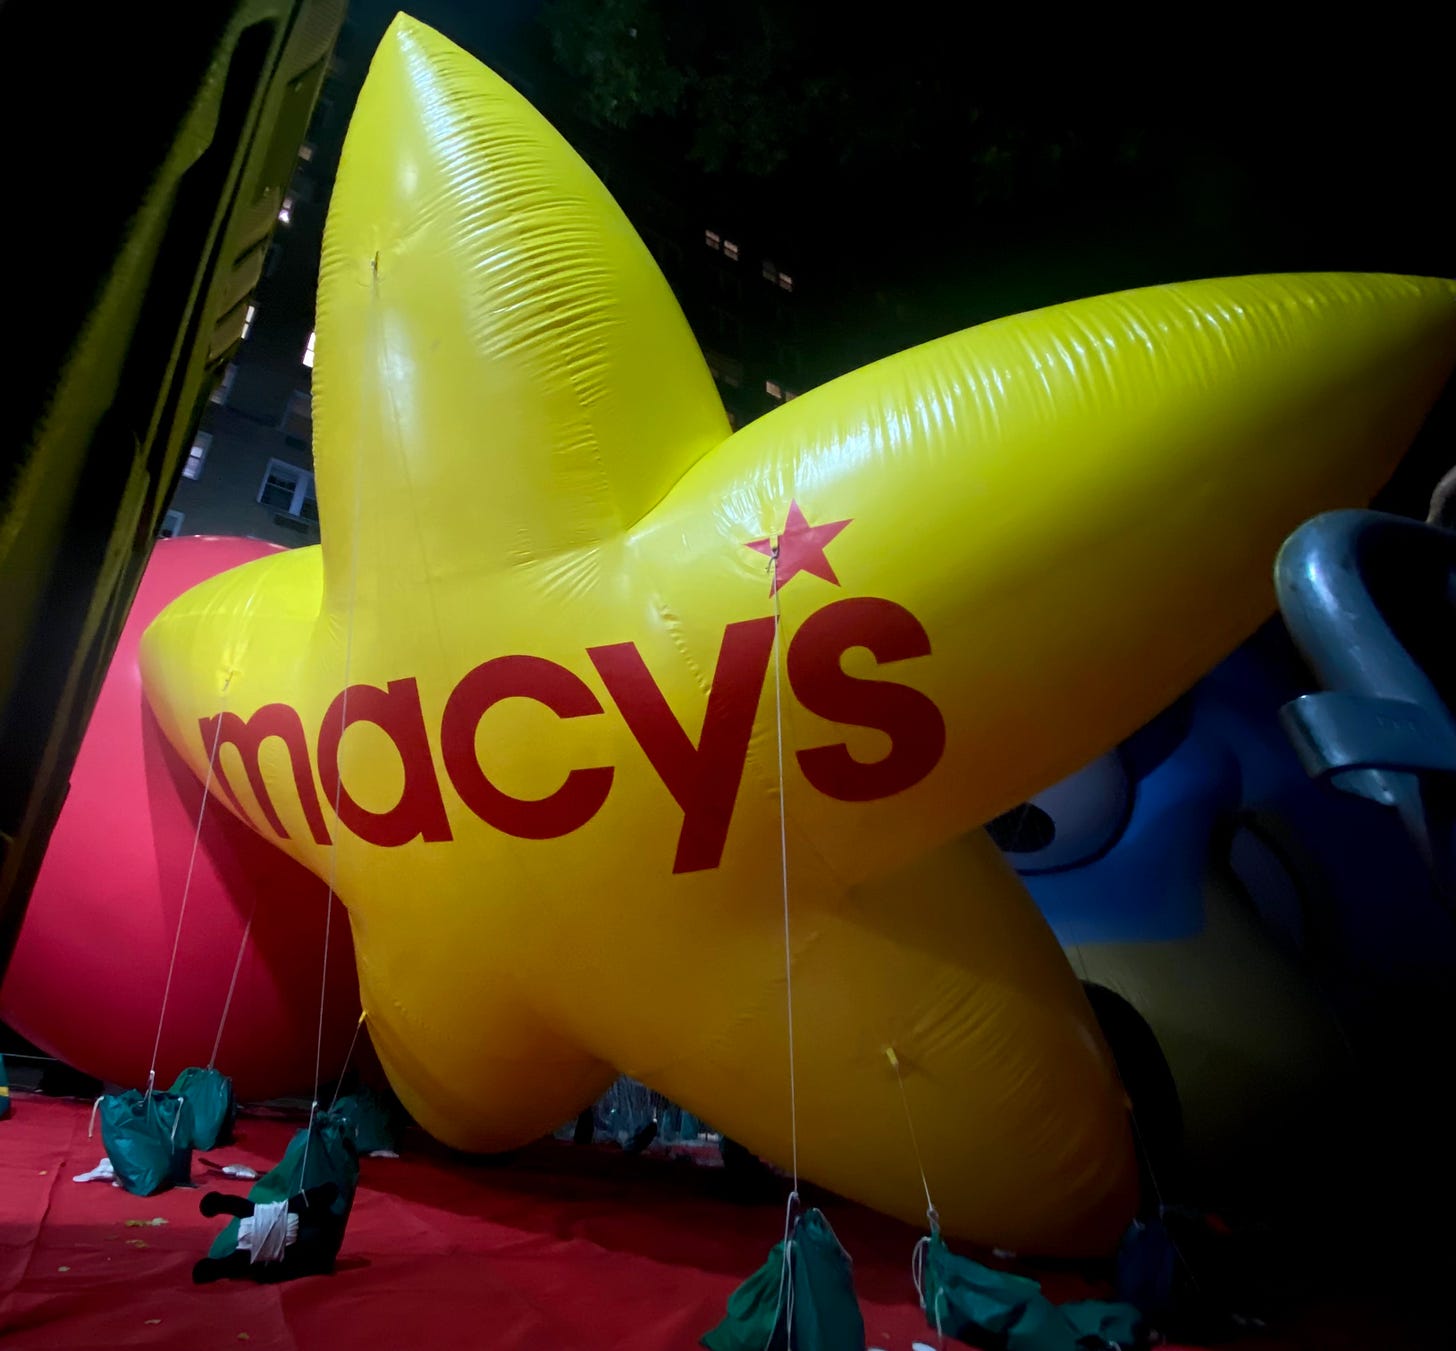 A large yellow balloon in the shape of a star with Macy's written in red letters. It is in the street on the Upper West Side, held down by sandbags.